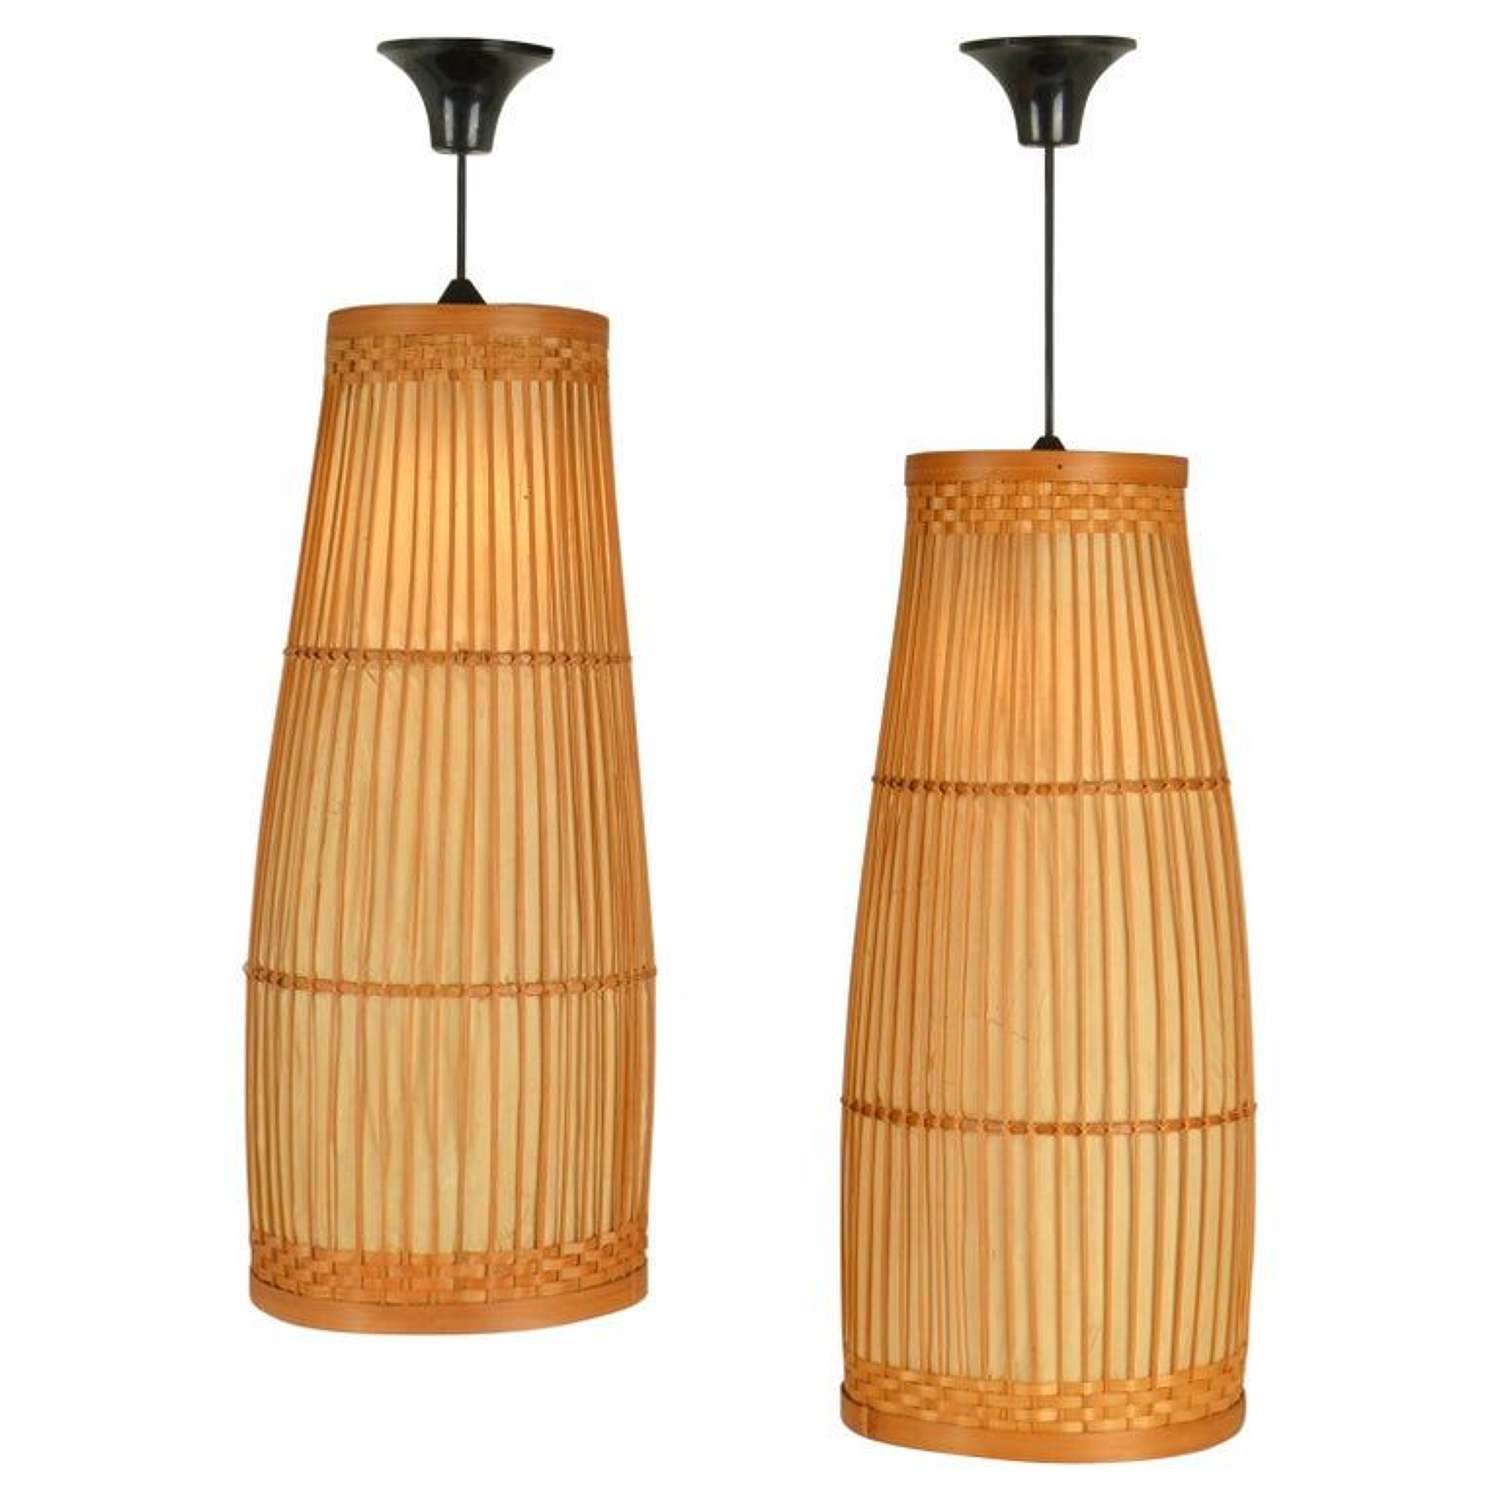 Pair of 1970's Japanese Lanterns in Rice Paper and Bamboo Cane